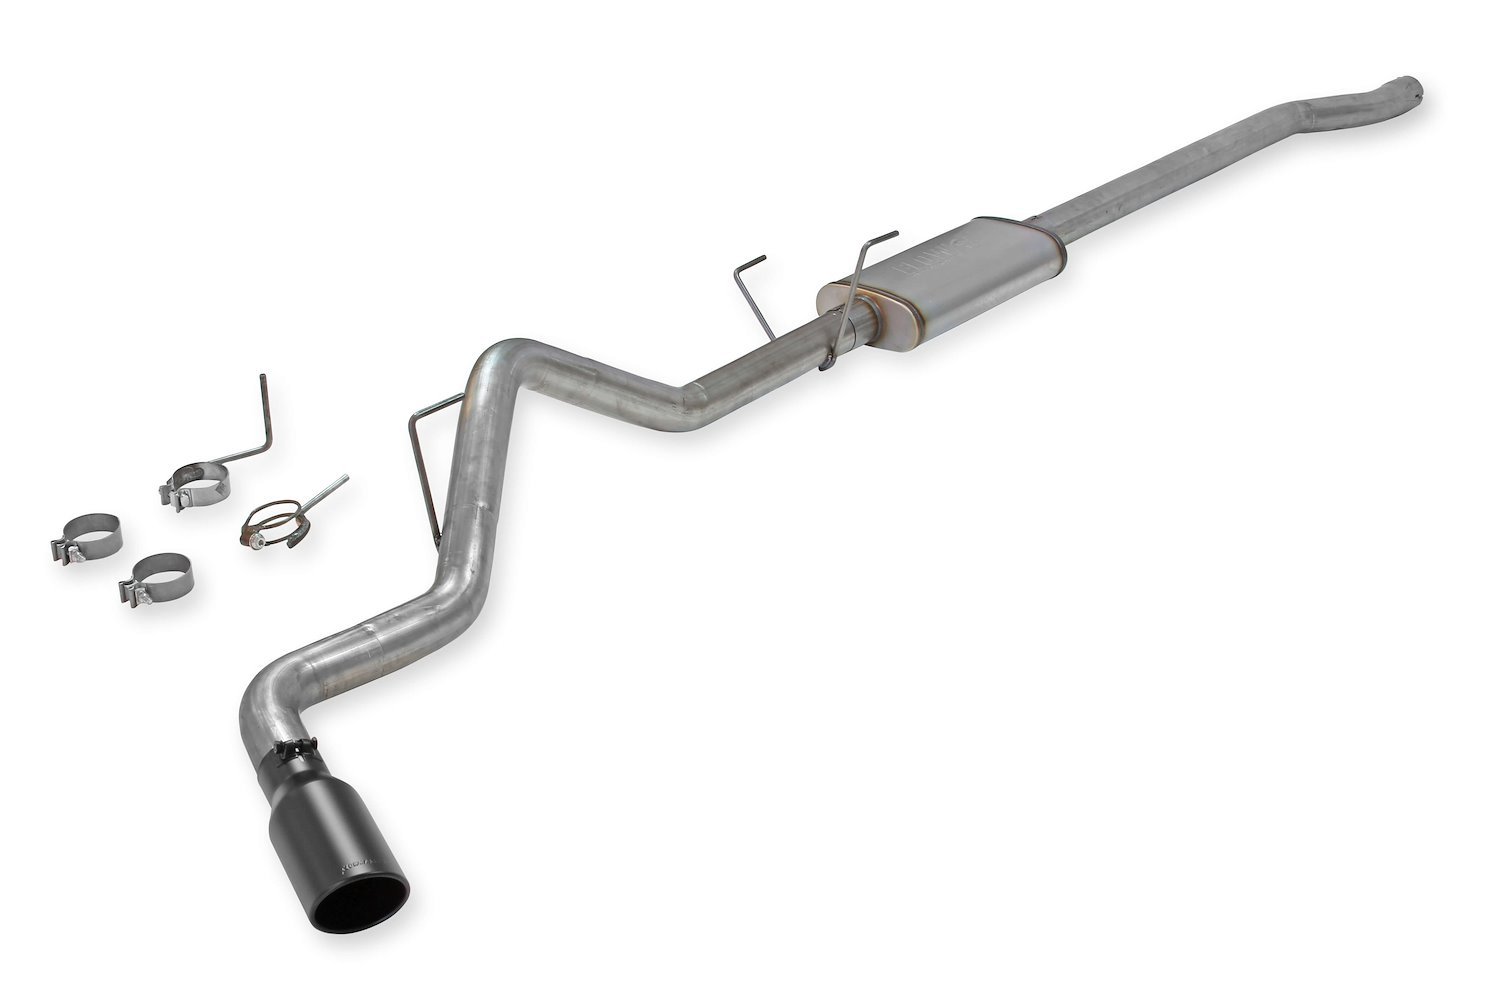 FlowFX Cat-Back Exhaust System for Select 2003-2012 Dodge Ram 1500, 2500, 3500 5.7L 2WD/4WD Pickup Trucks